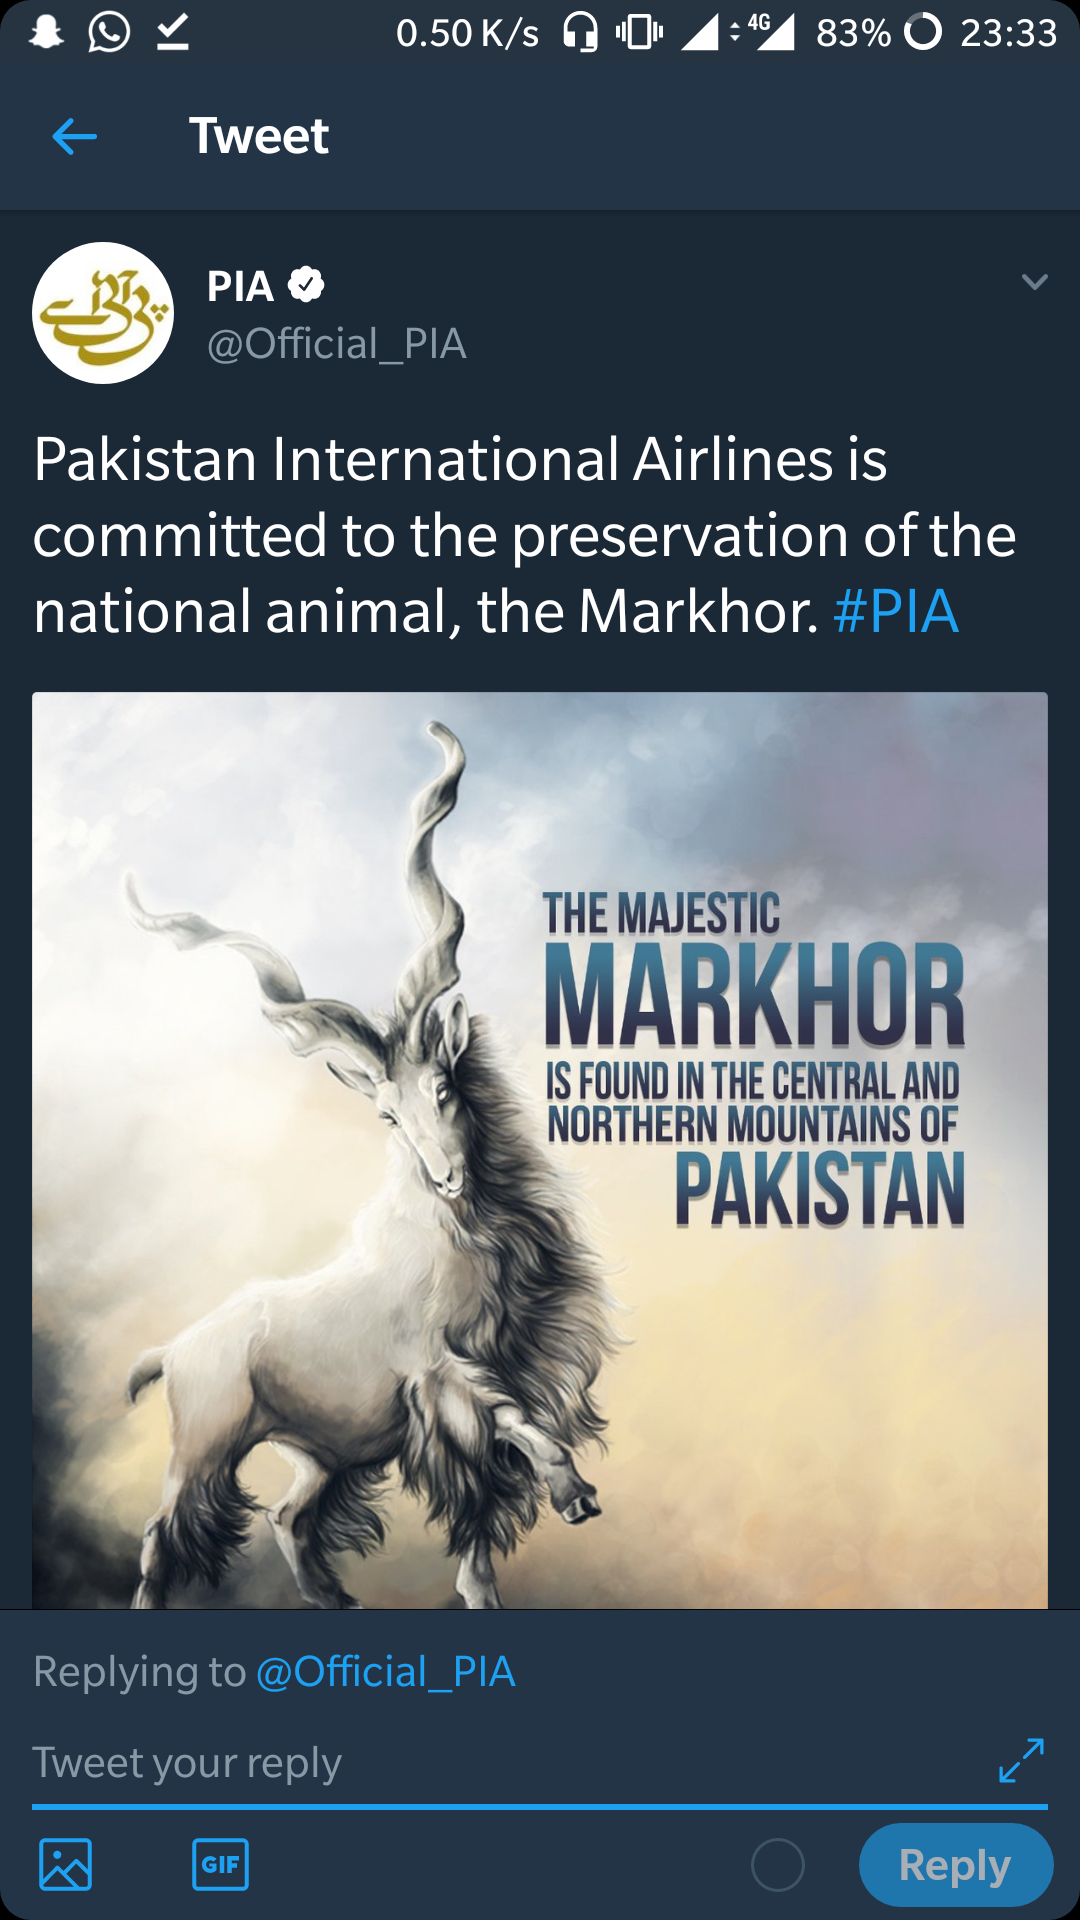 PIA is committed to the preservation of national animal, the markhor